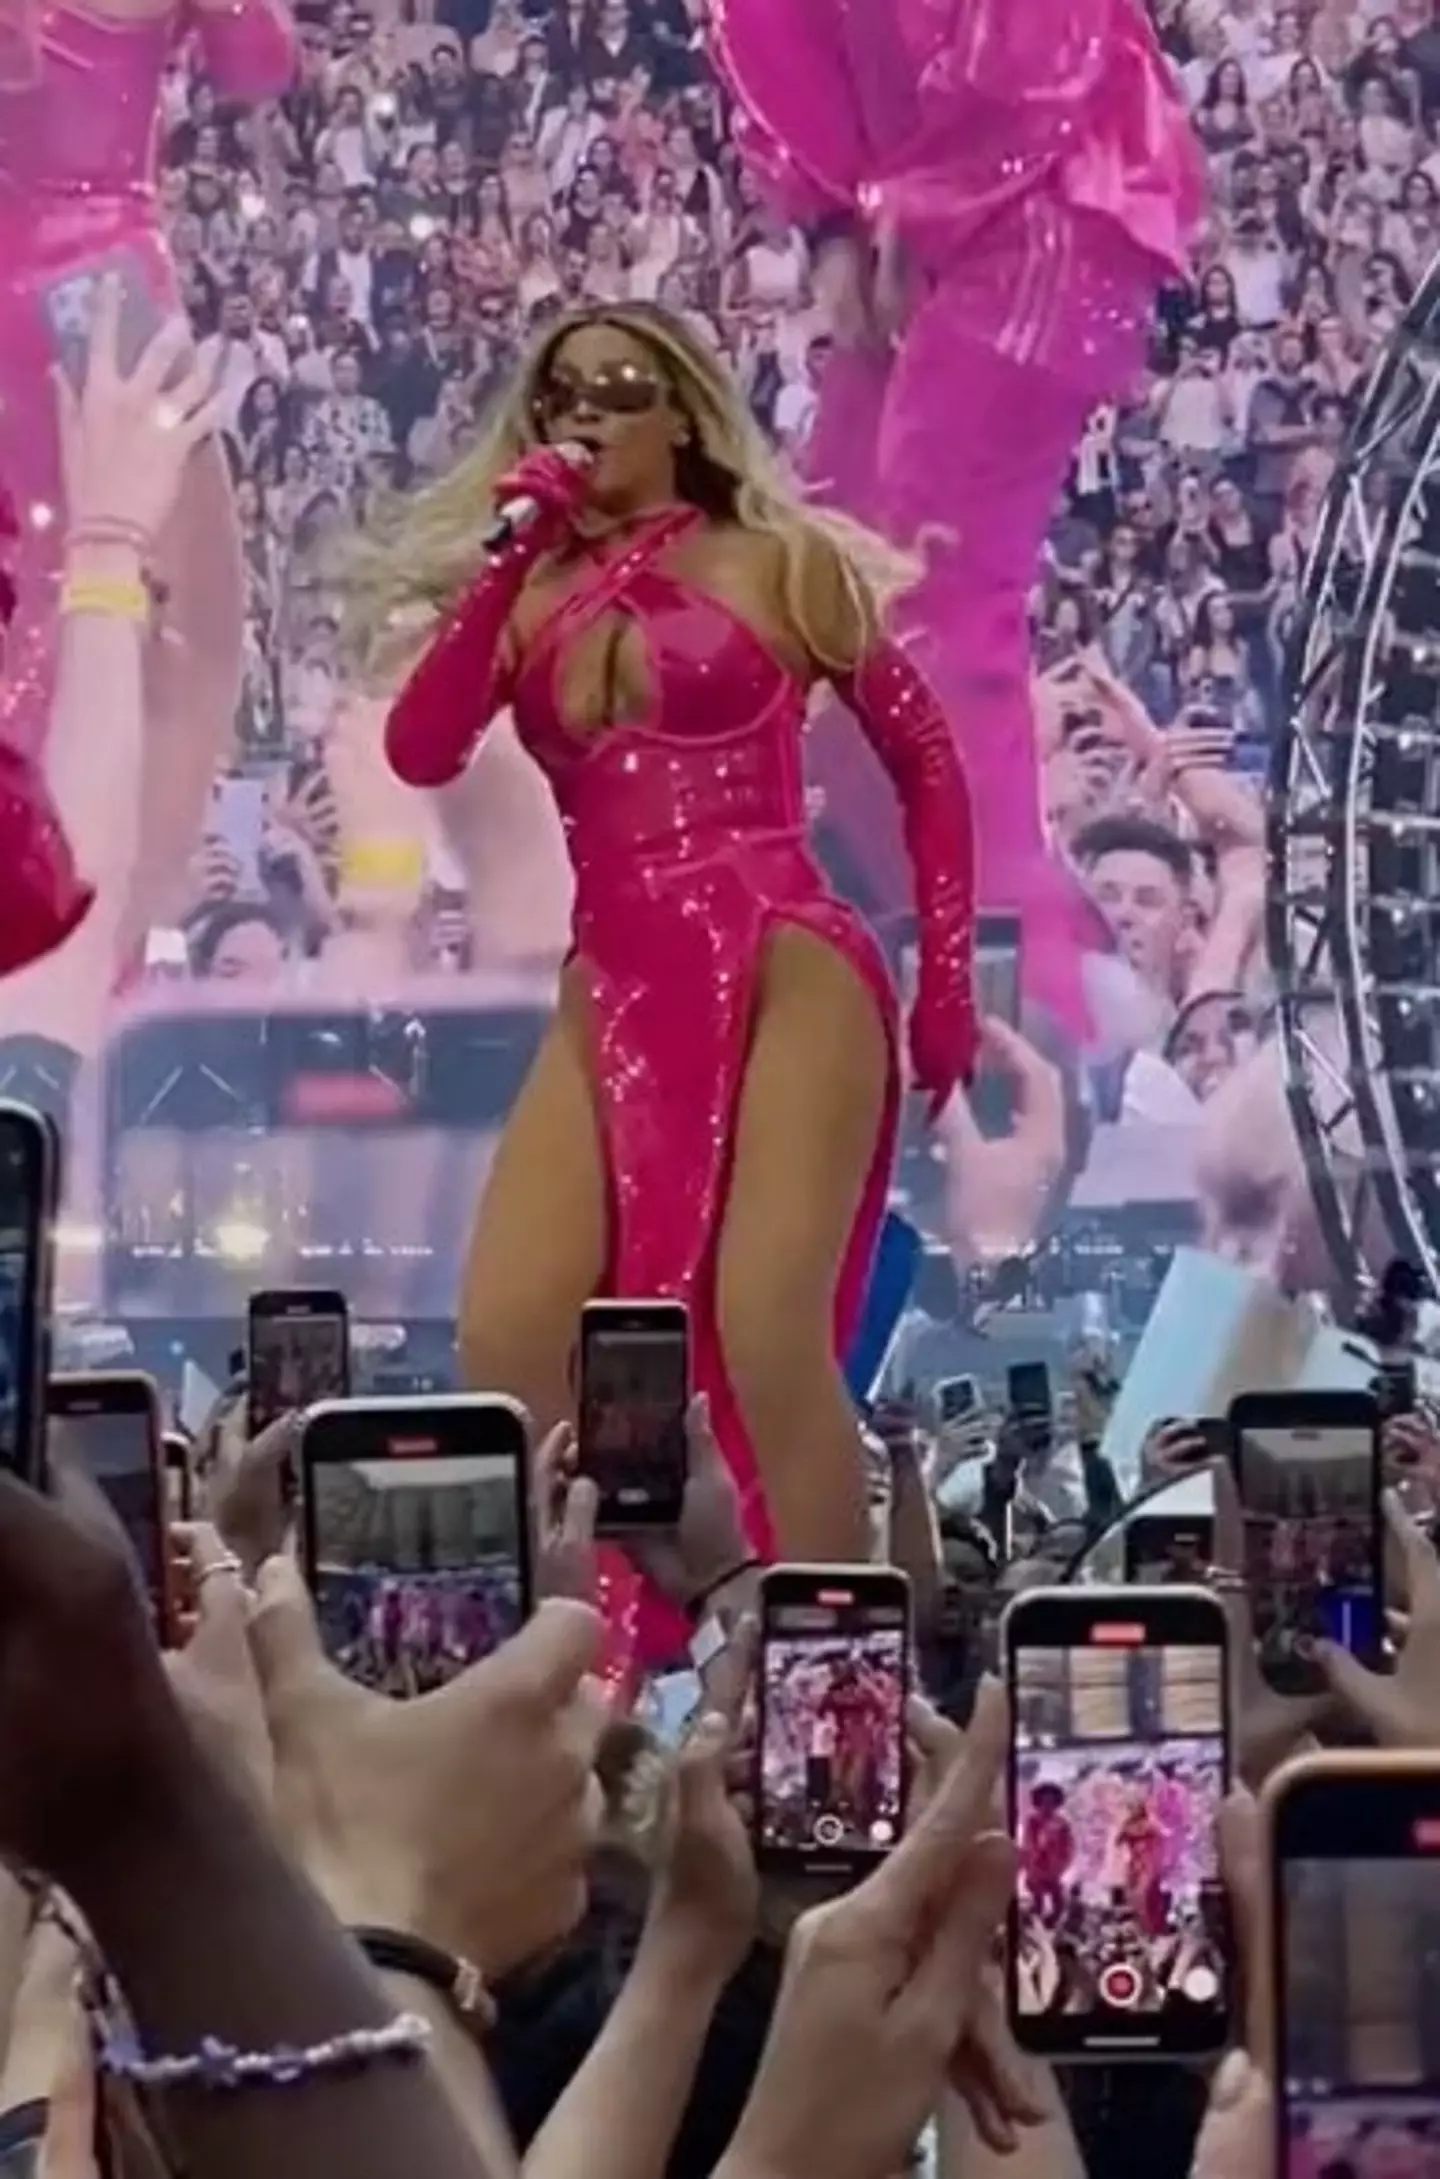 Fans think Beyonce was moments away from an on-stage wardrobe malfunction.